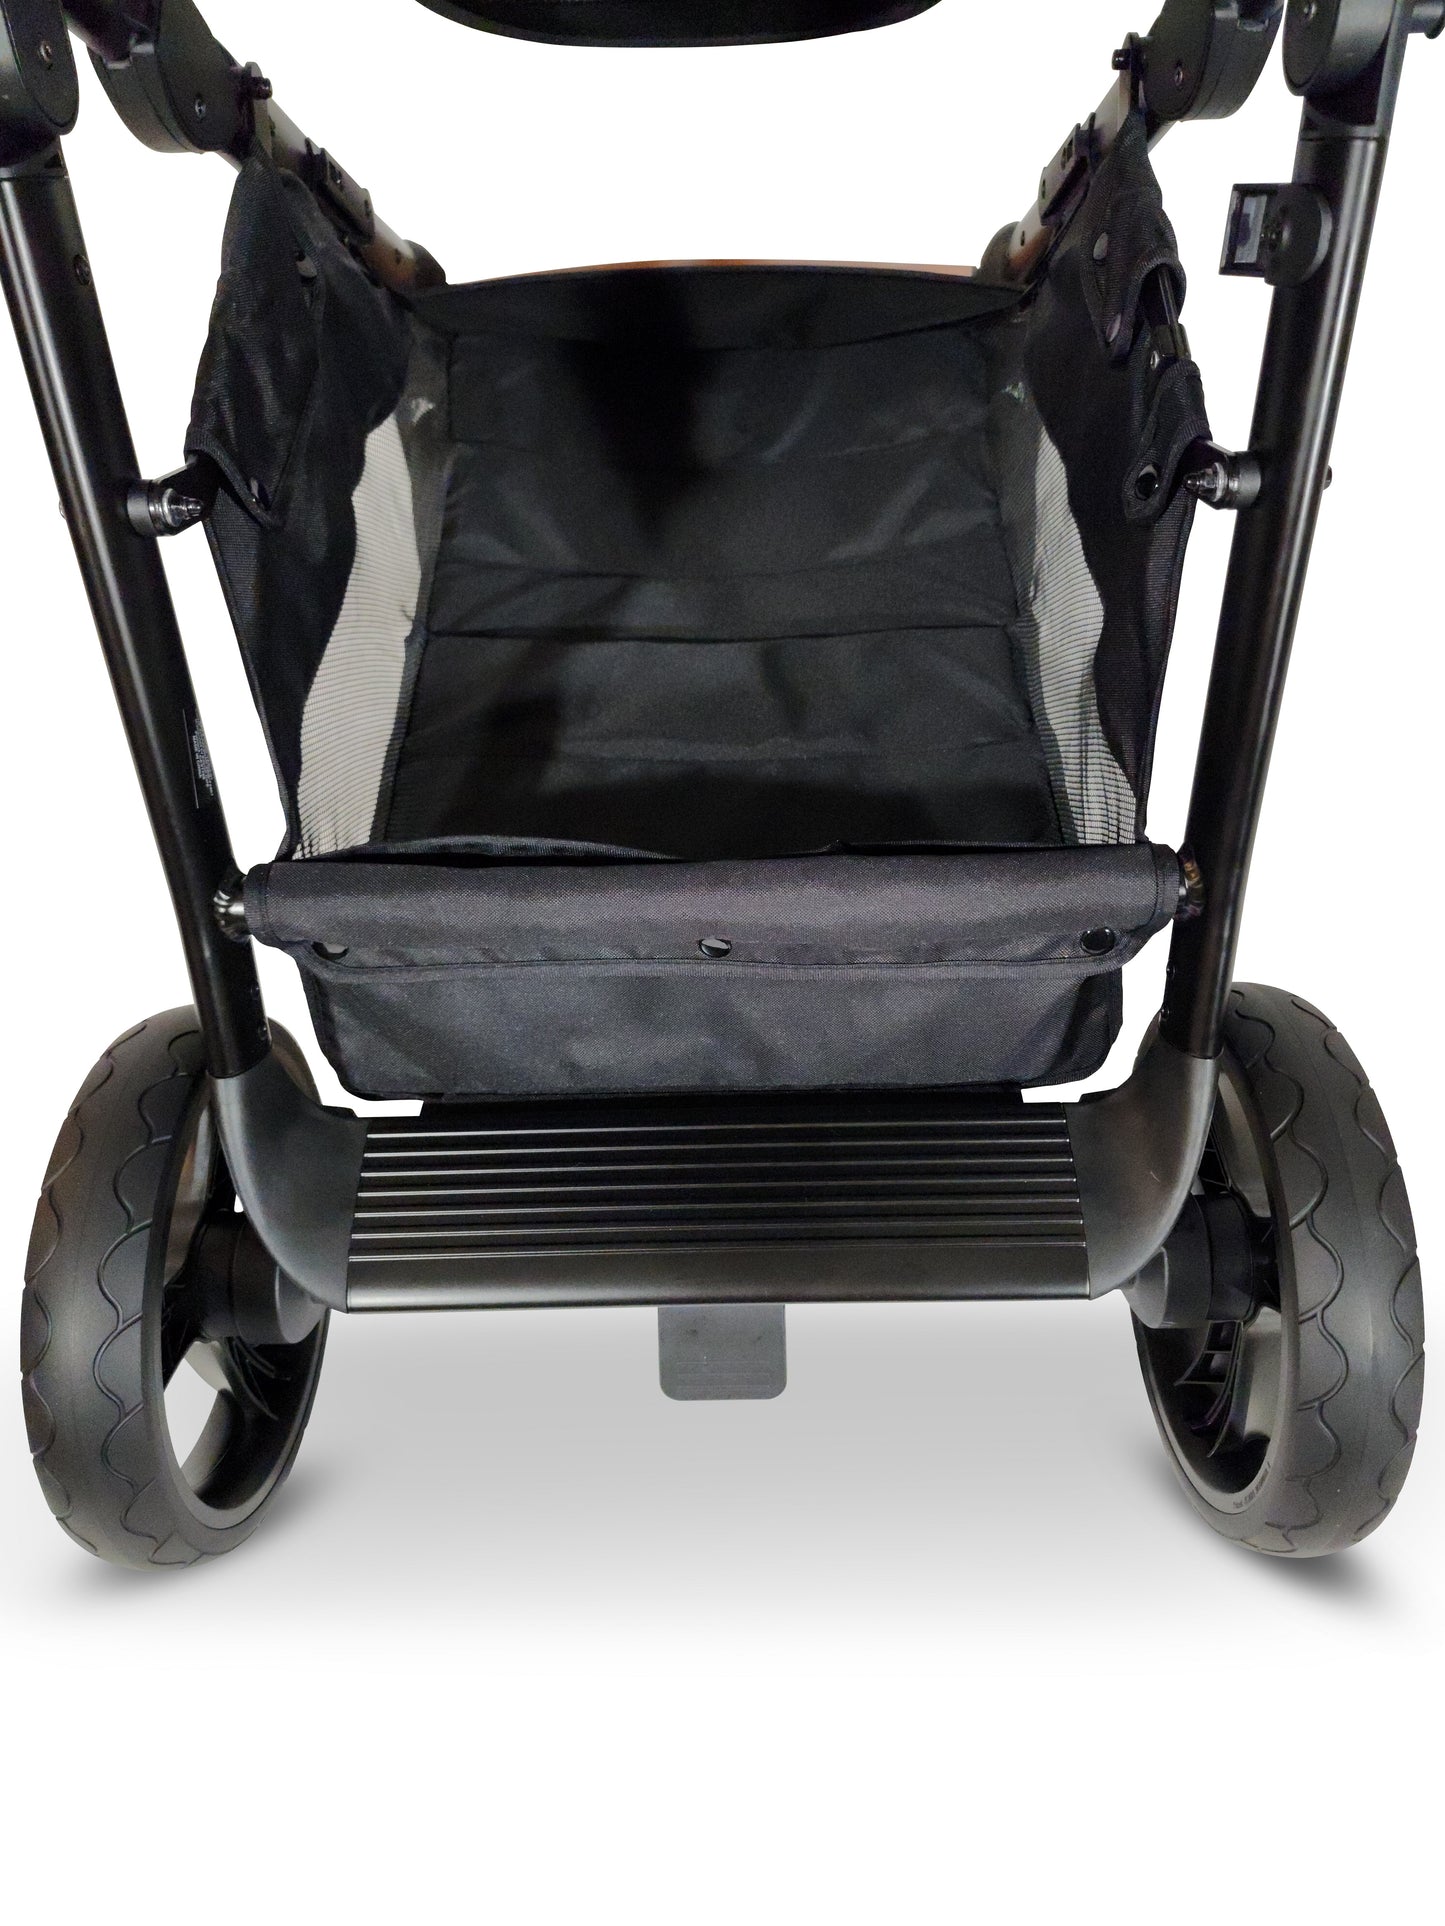 VENTURA SINGLE TO DOUBLE SIT AND STAND STROLLER